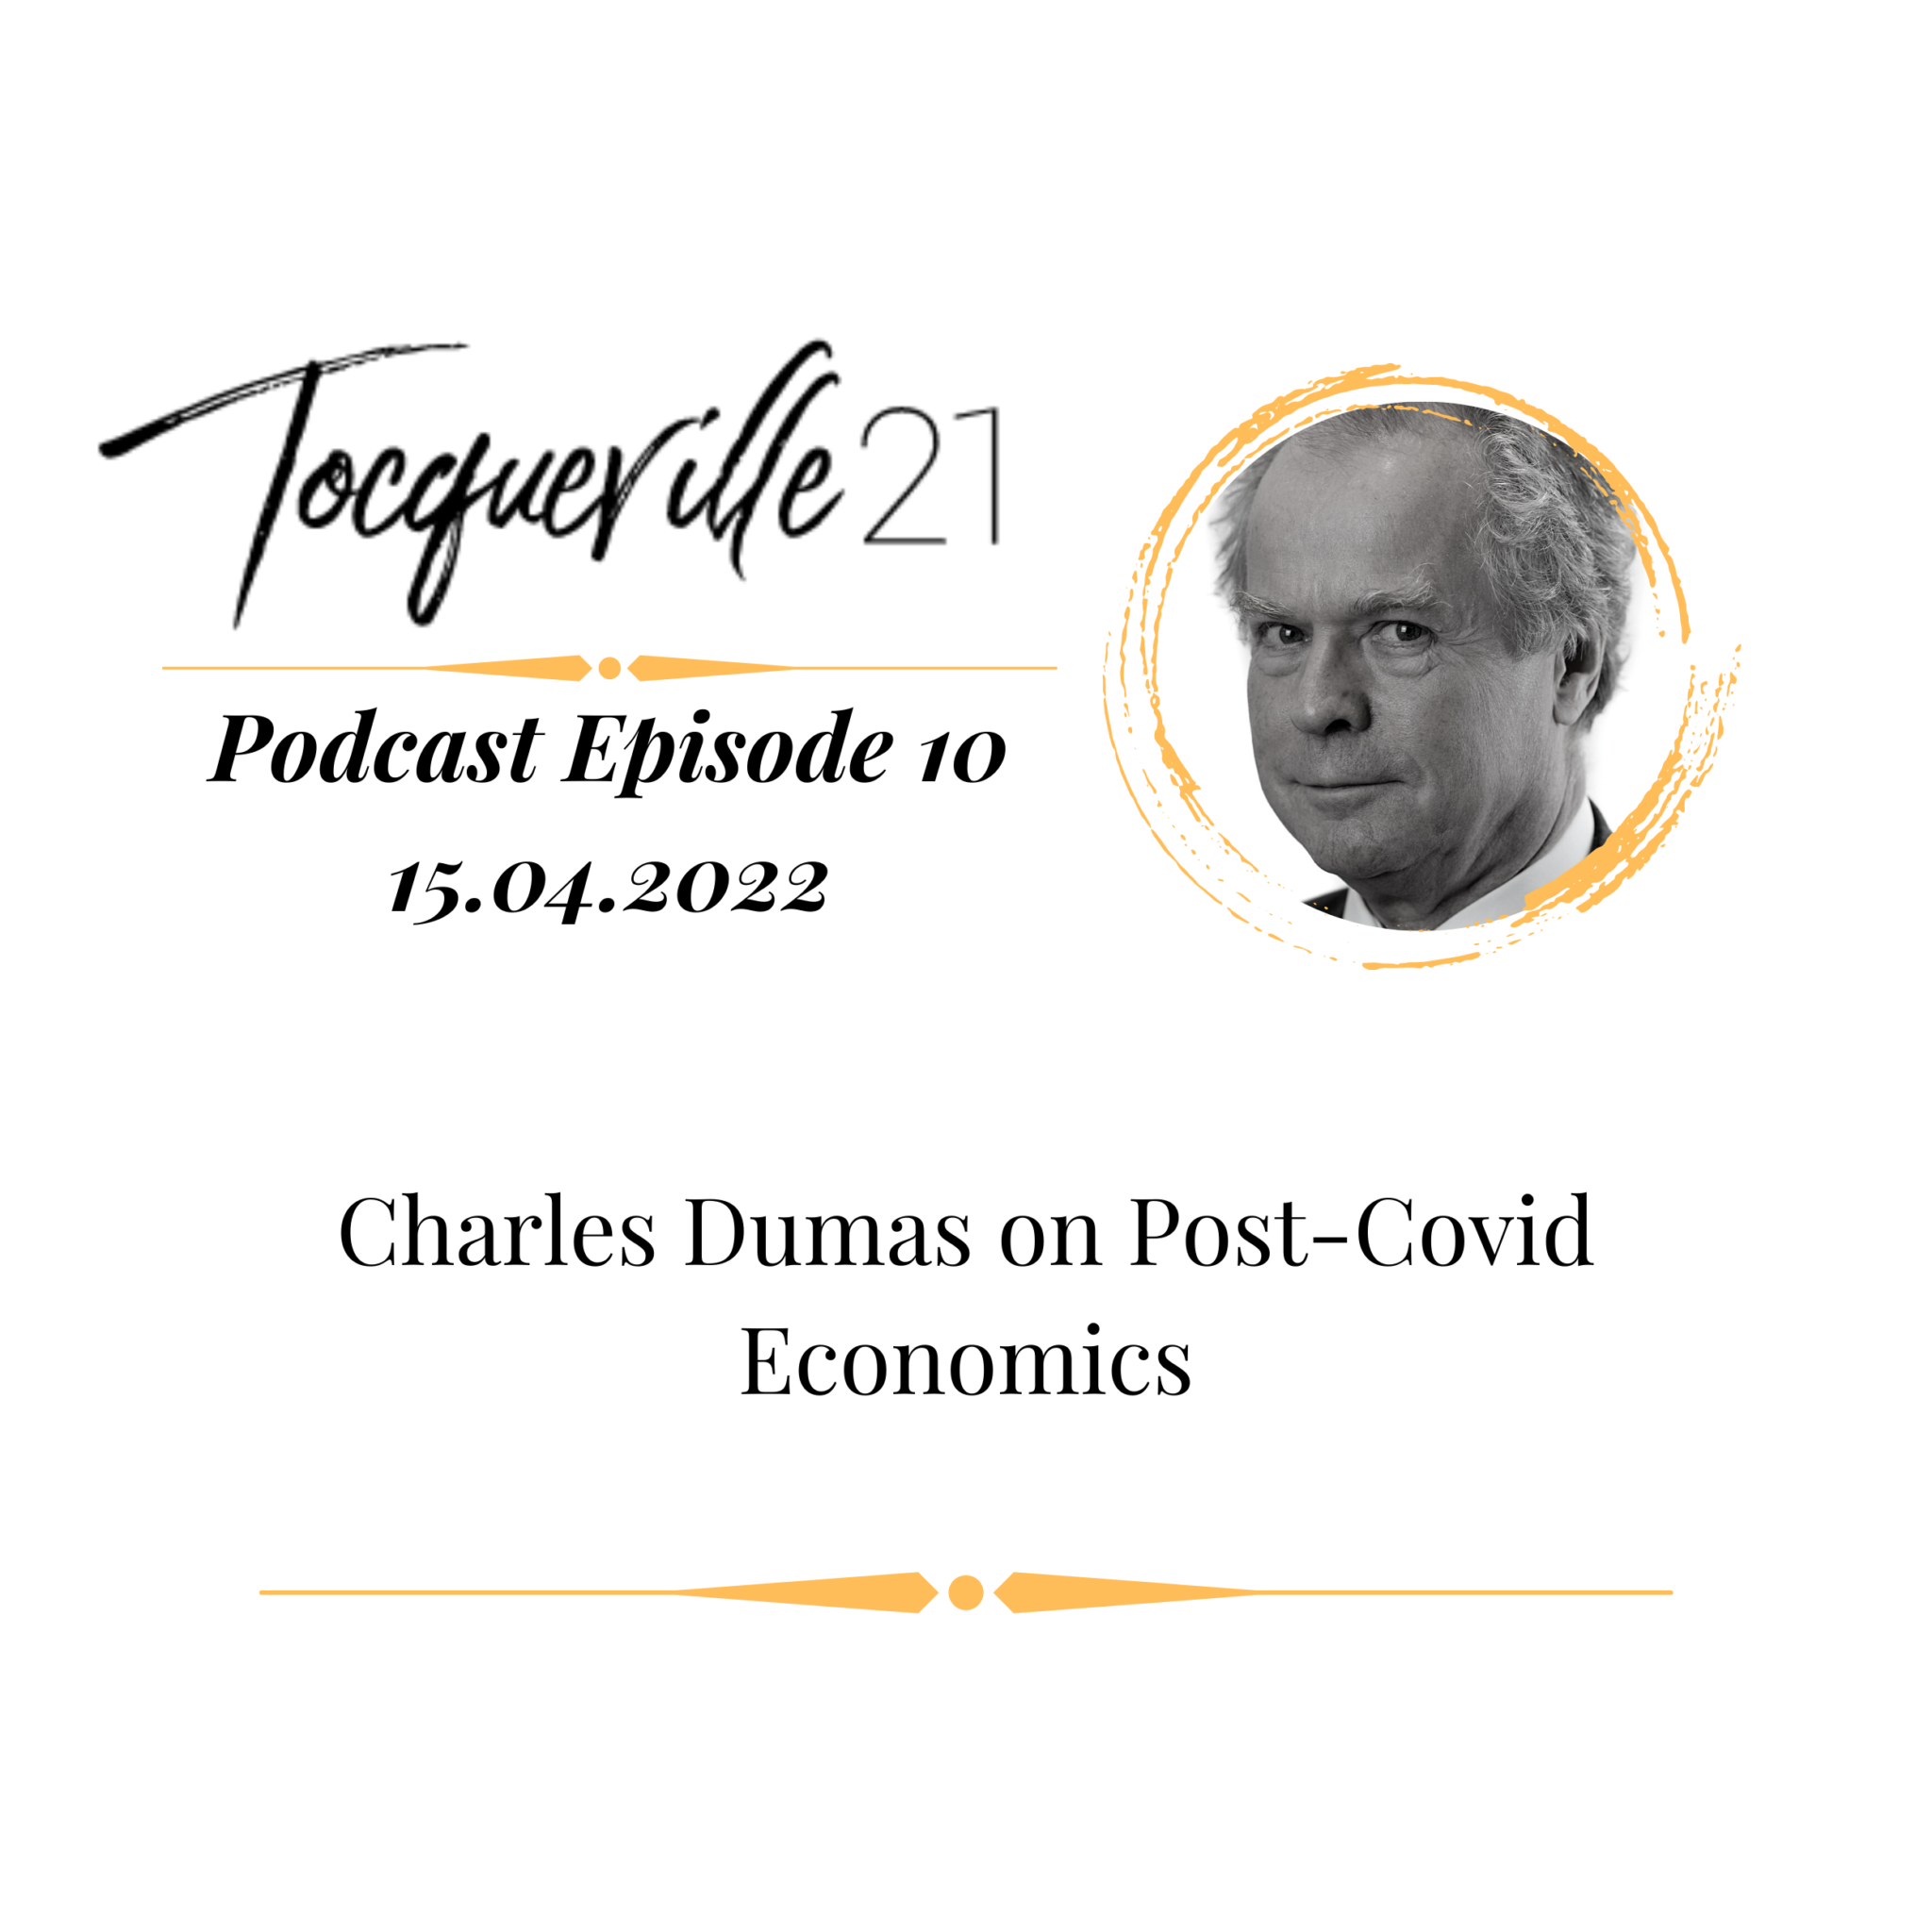 Tocqueville 21 Podcast: Post-Covid Economics with Charles Dumas